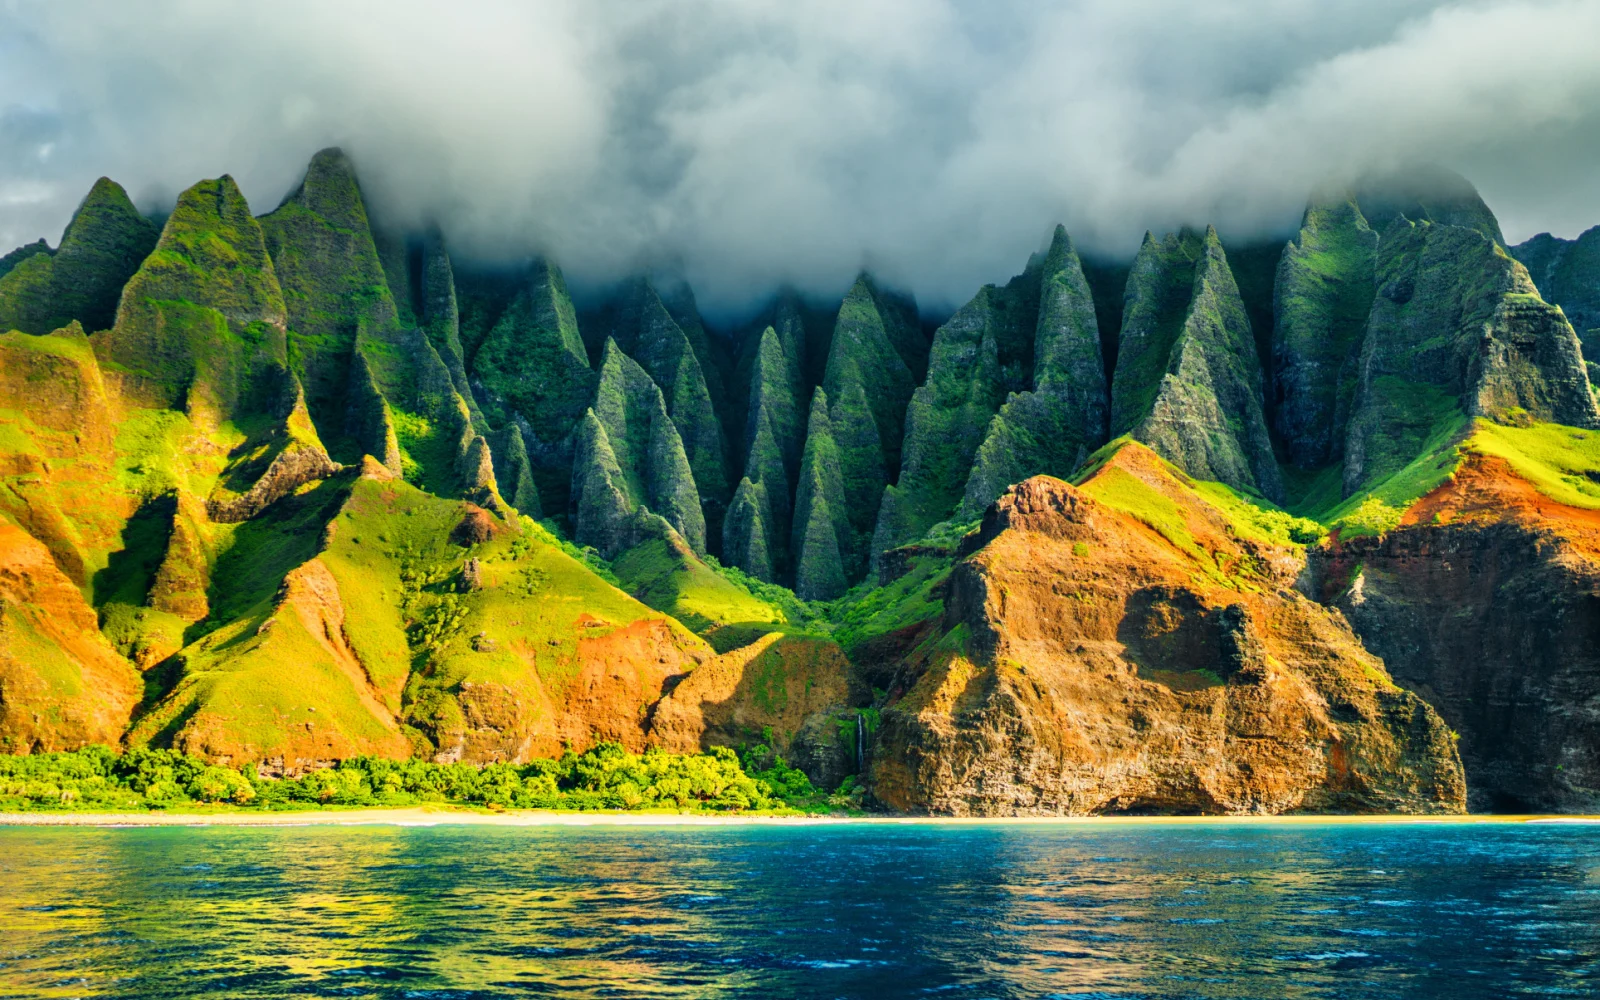 25 Fun and Interesting Facts About Hawaii for 2023